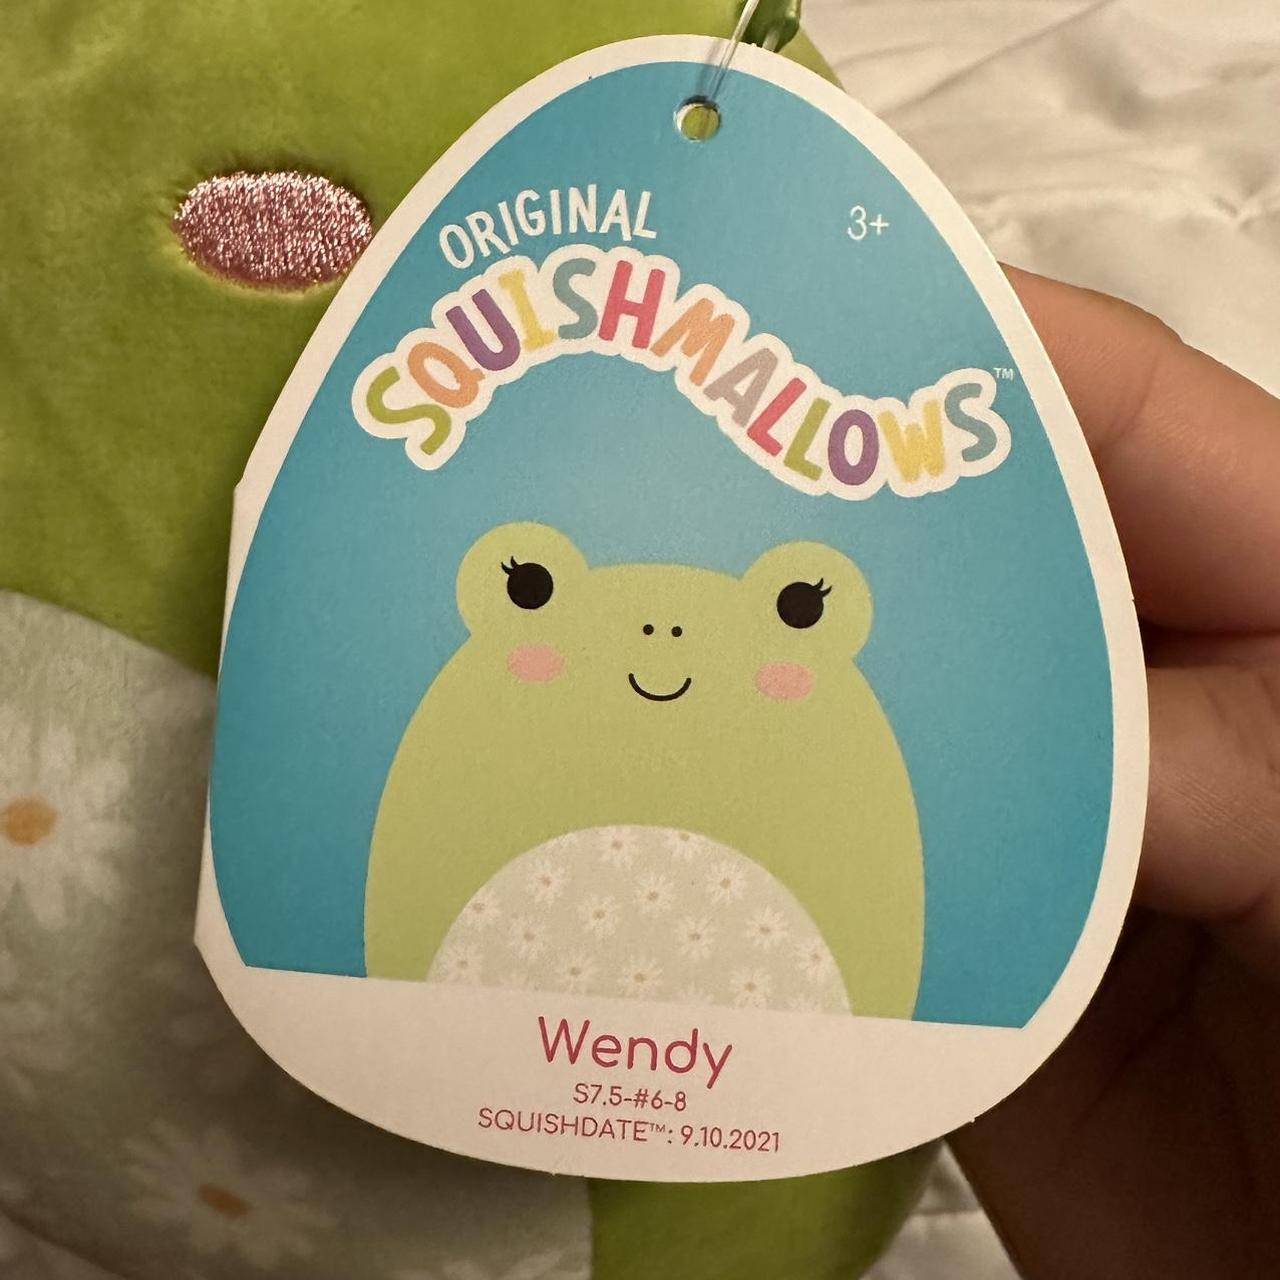 Wendy the frog squishmallow. Squishmallows is brand - Depop